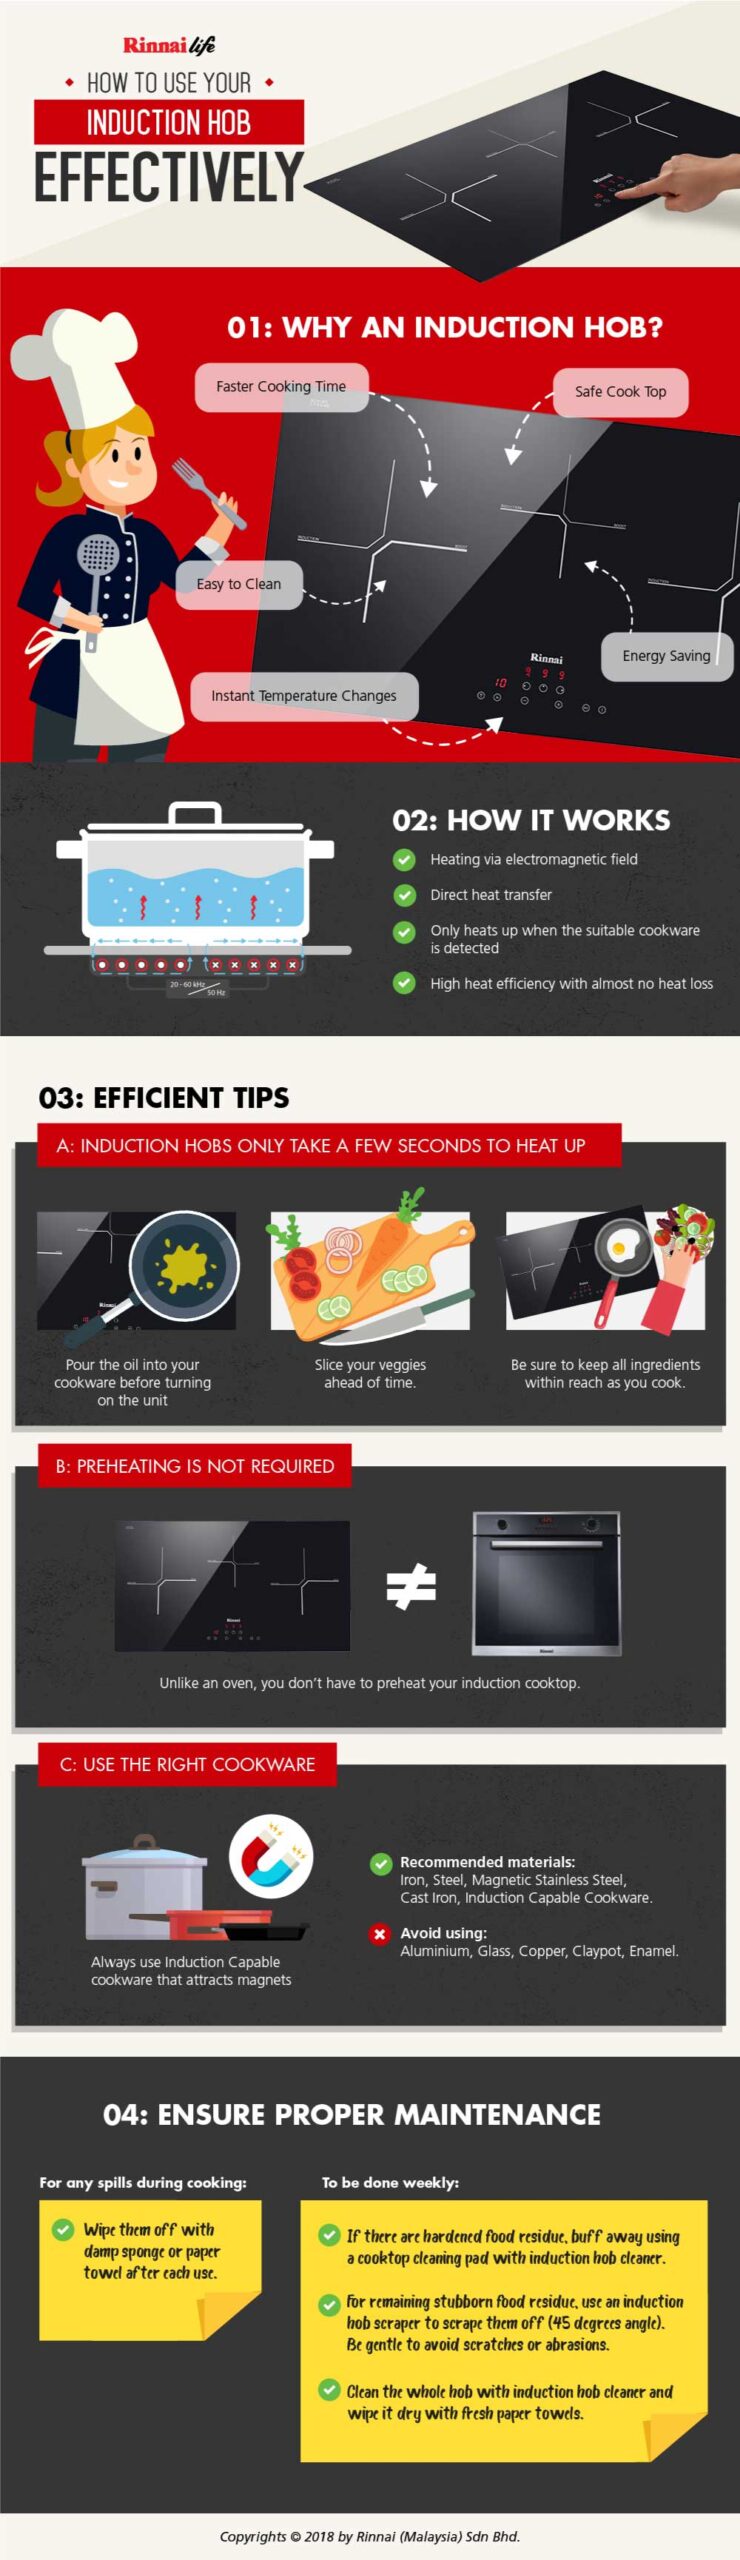 How-to-Use-an-Induction-Hob-Effectively-(Infographic)